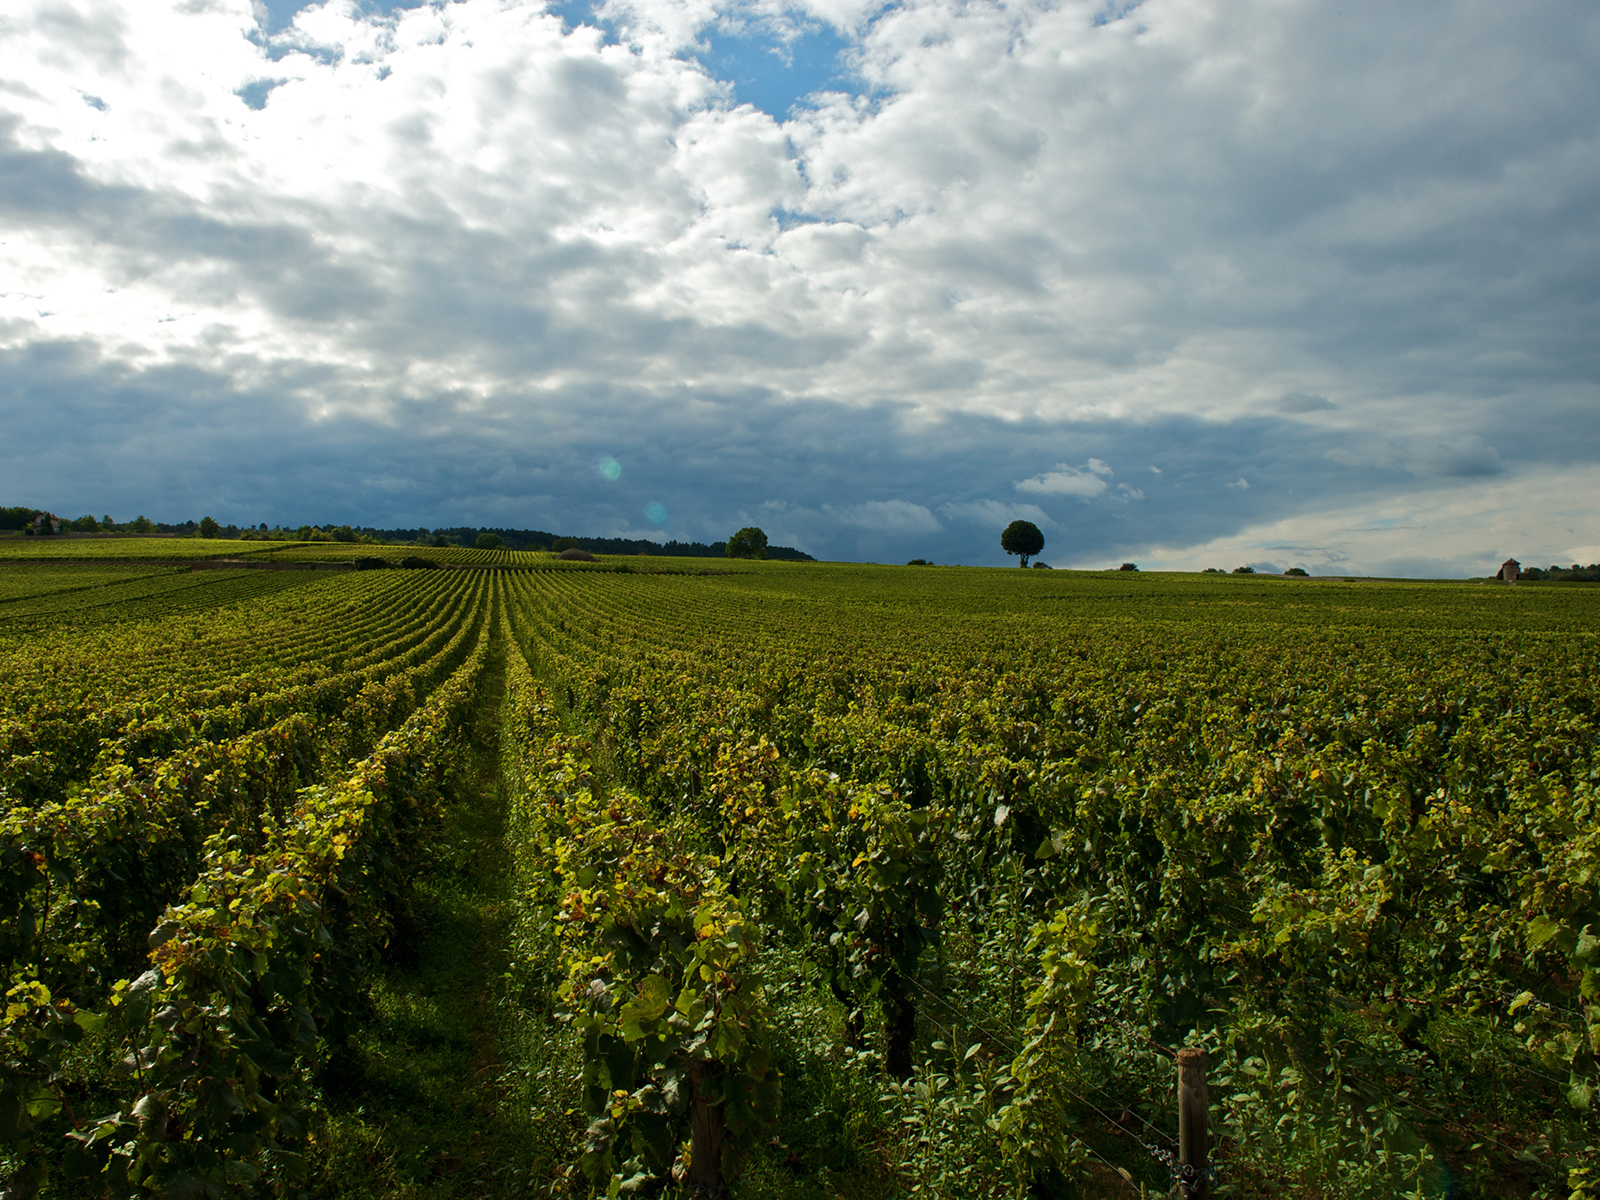 vineyards covering the hills near the village of Chambolle-Musigny in Burgundy, France